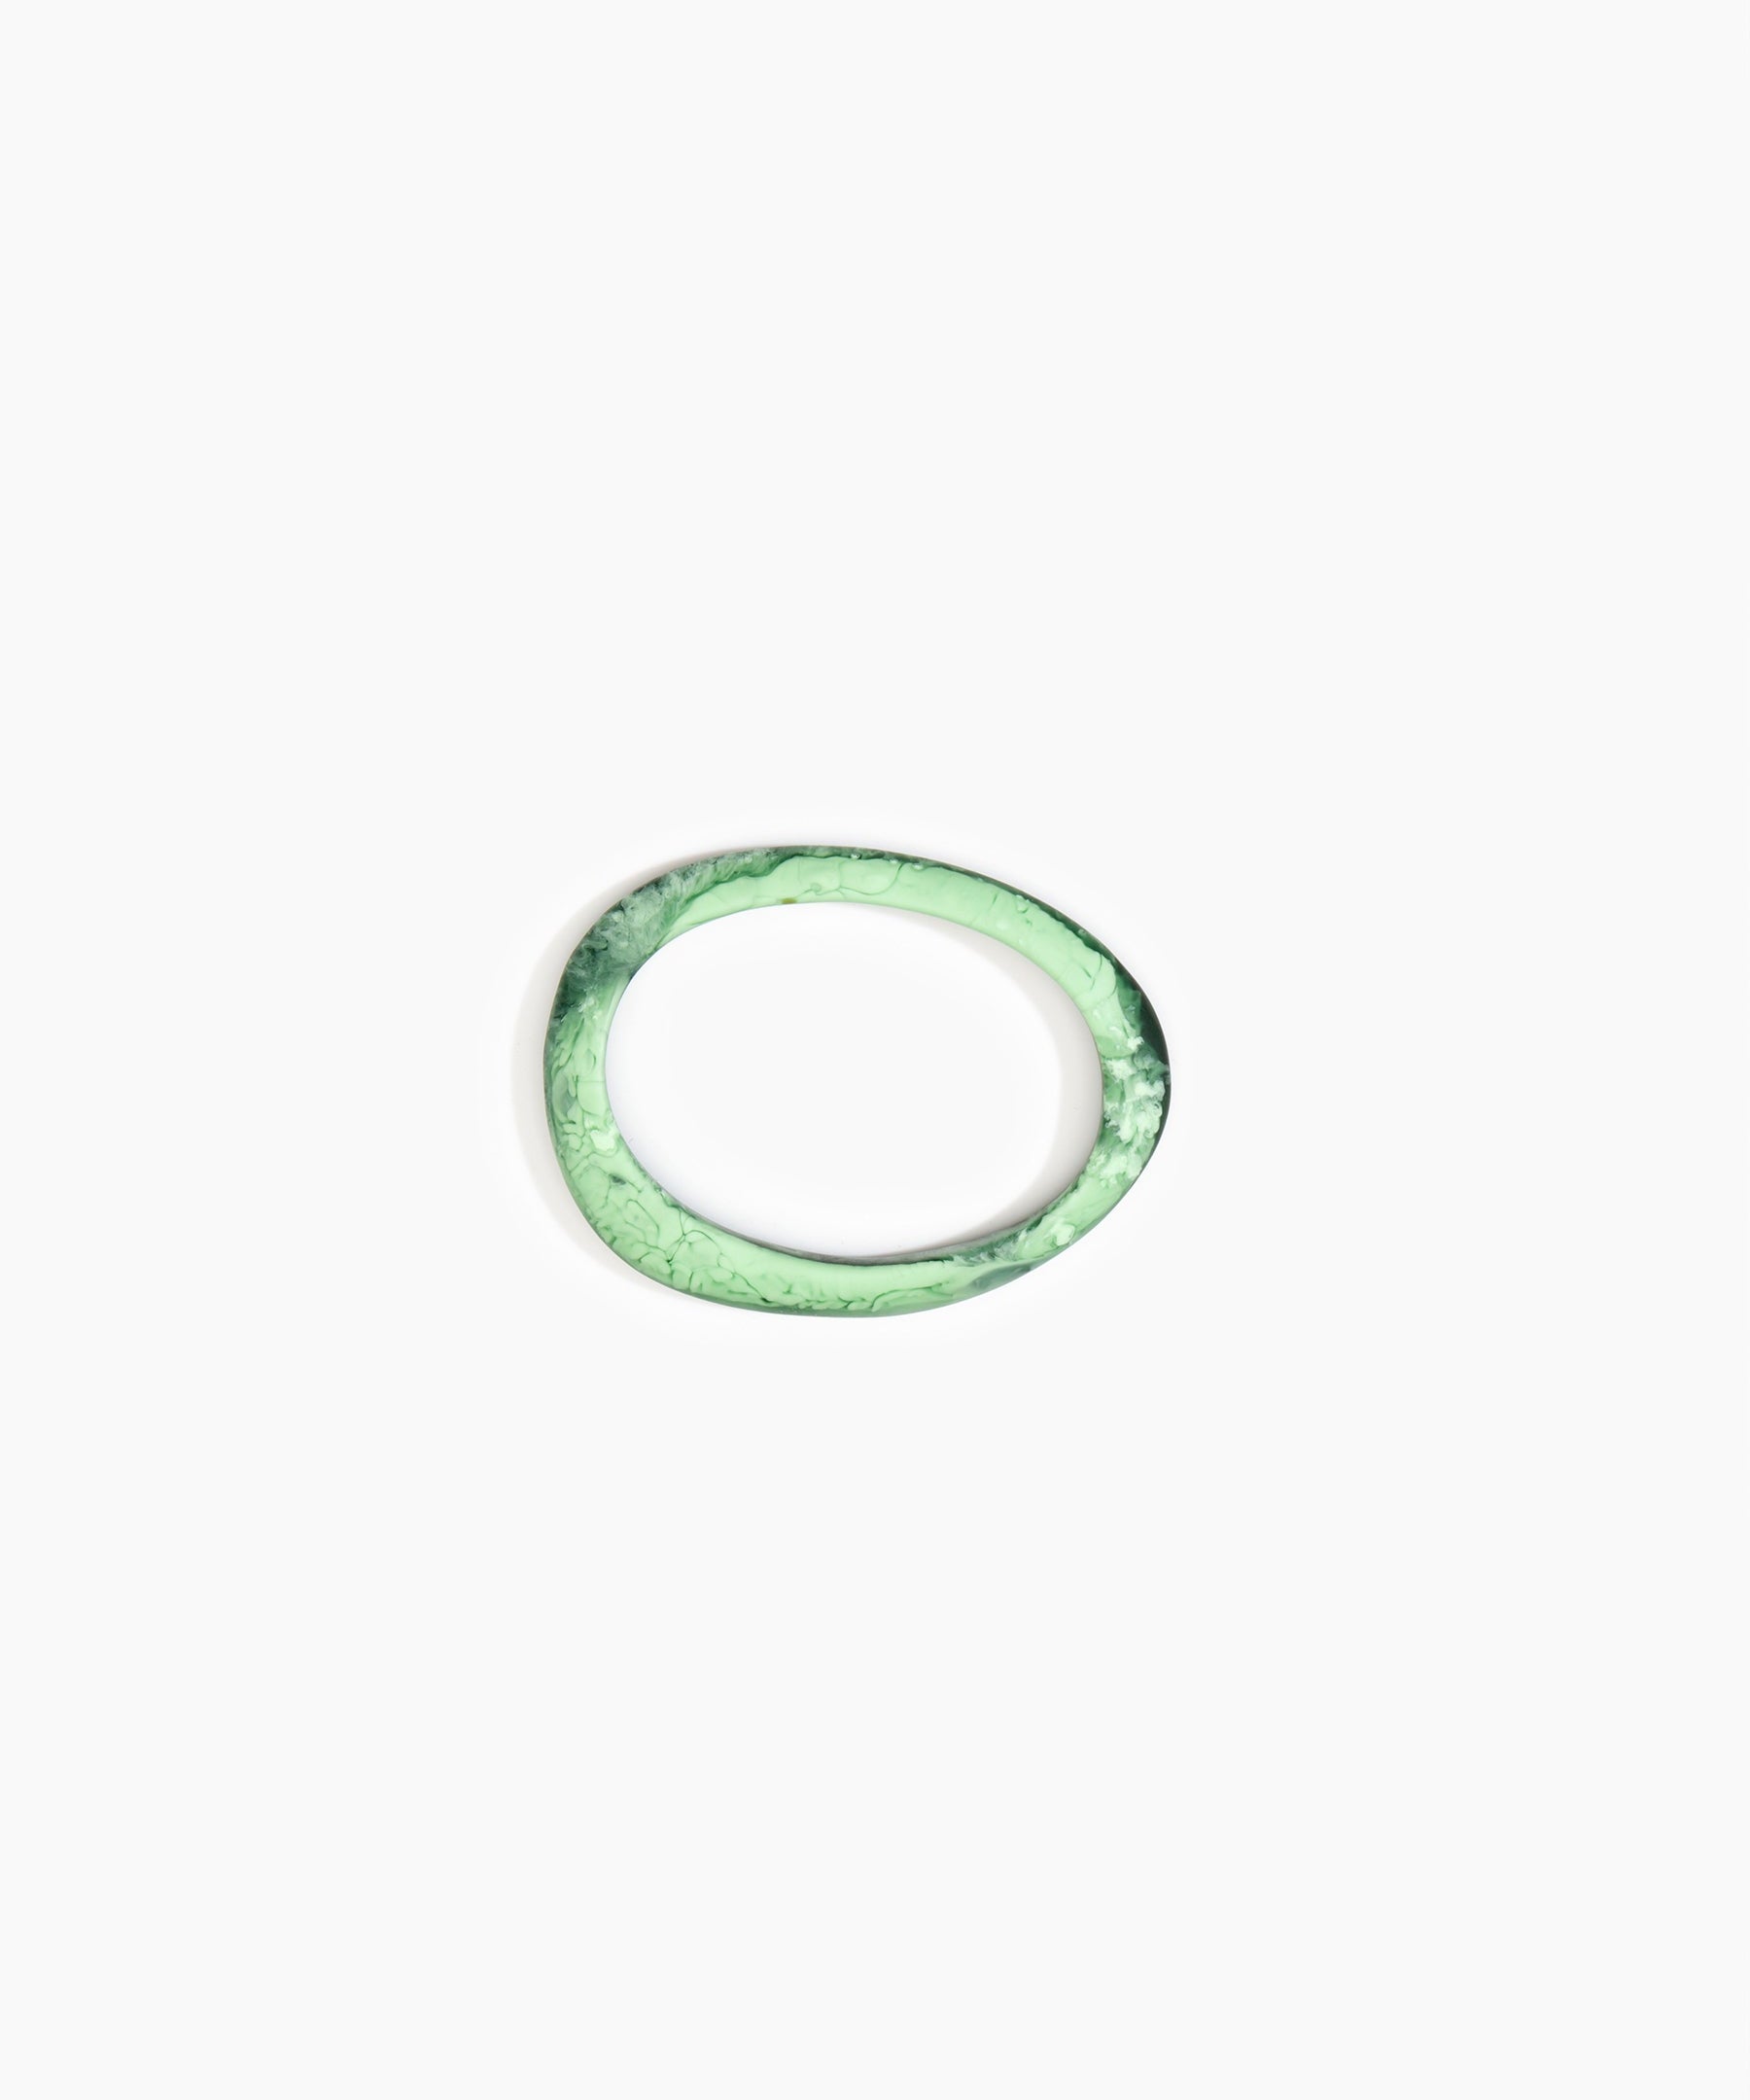 Dinosaur Designs Rock Wishbone Bangle Bracelets in Moss color resin with Narrow Fit